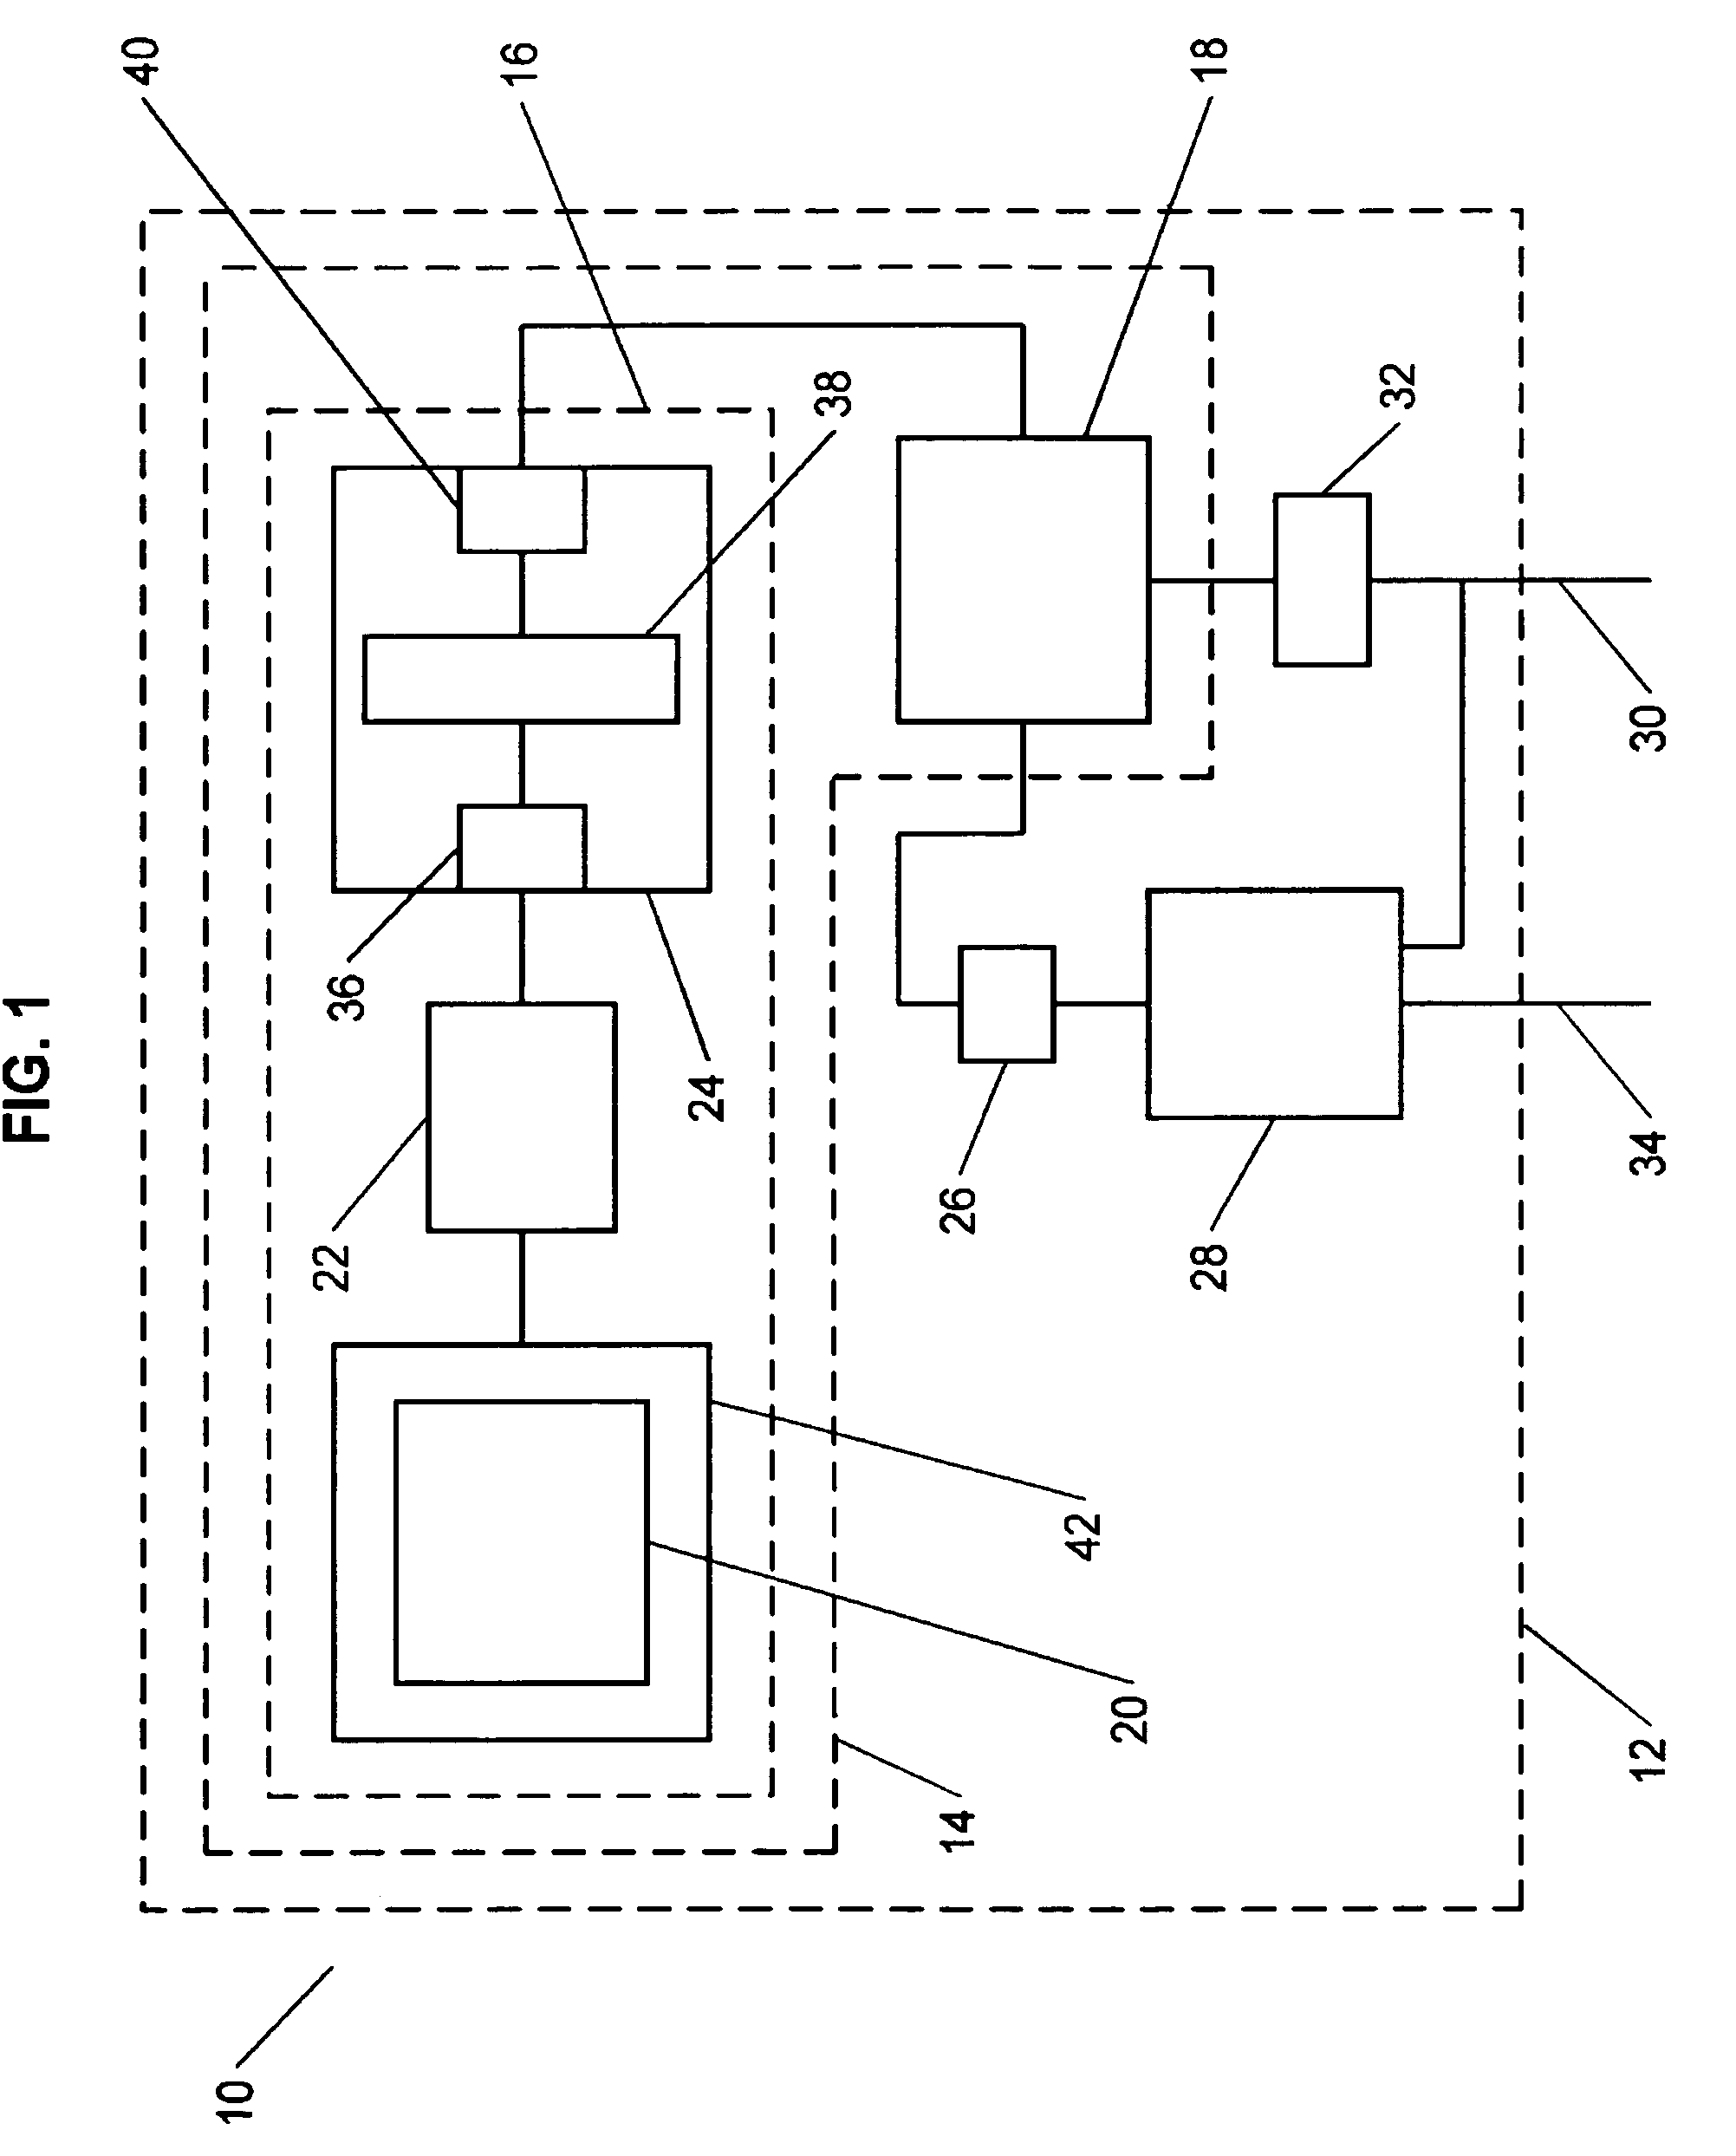 Electrical generator having an oscillator containing a freely moving internal element to improve generator effectiveness